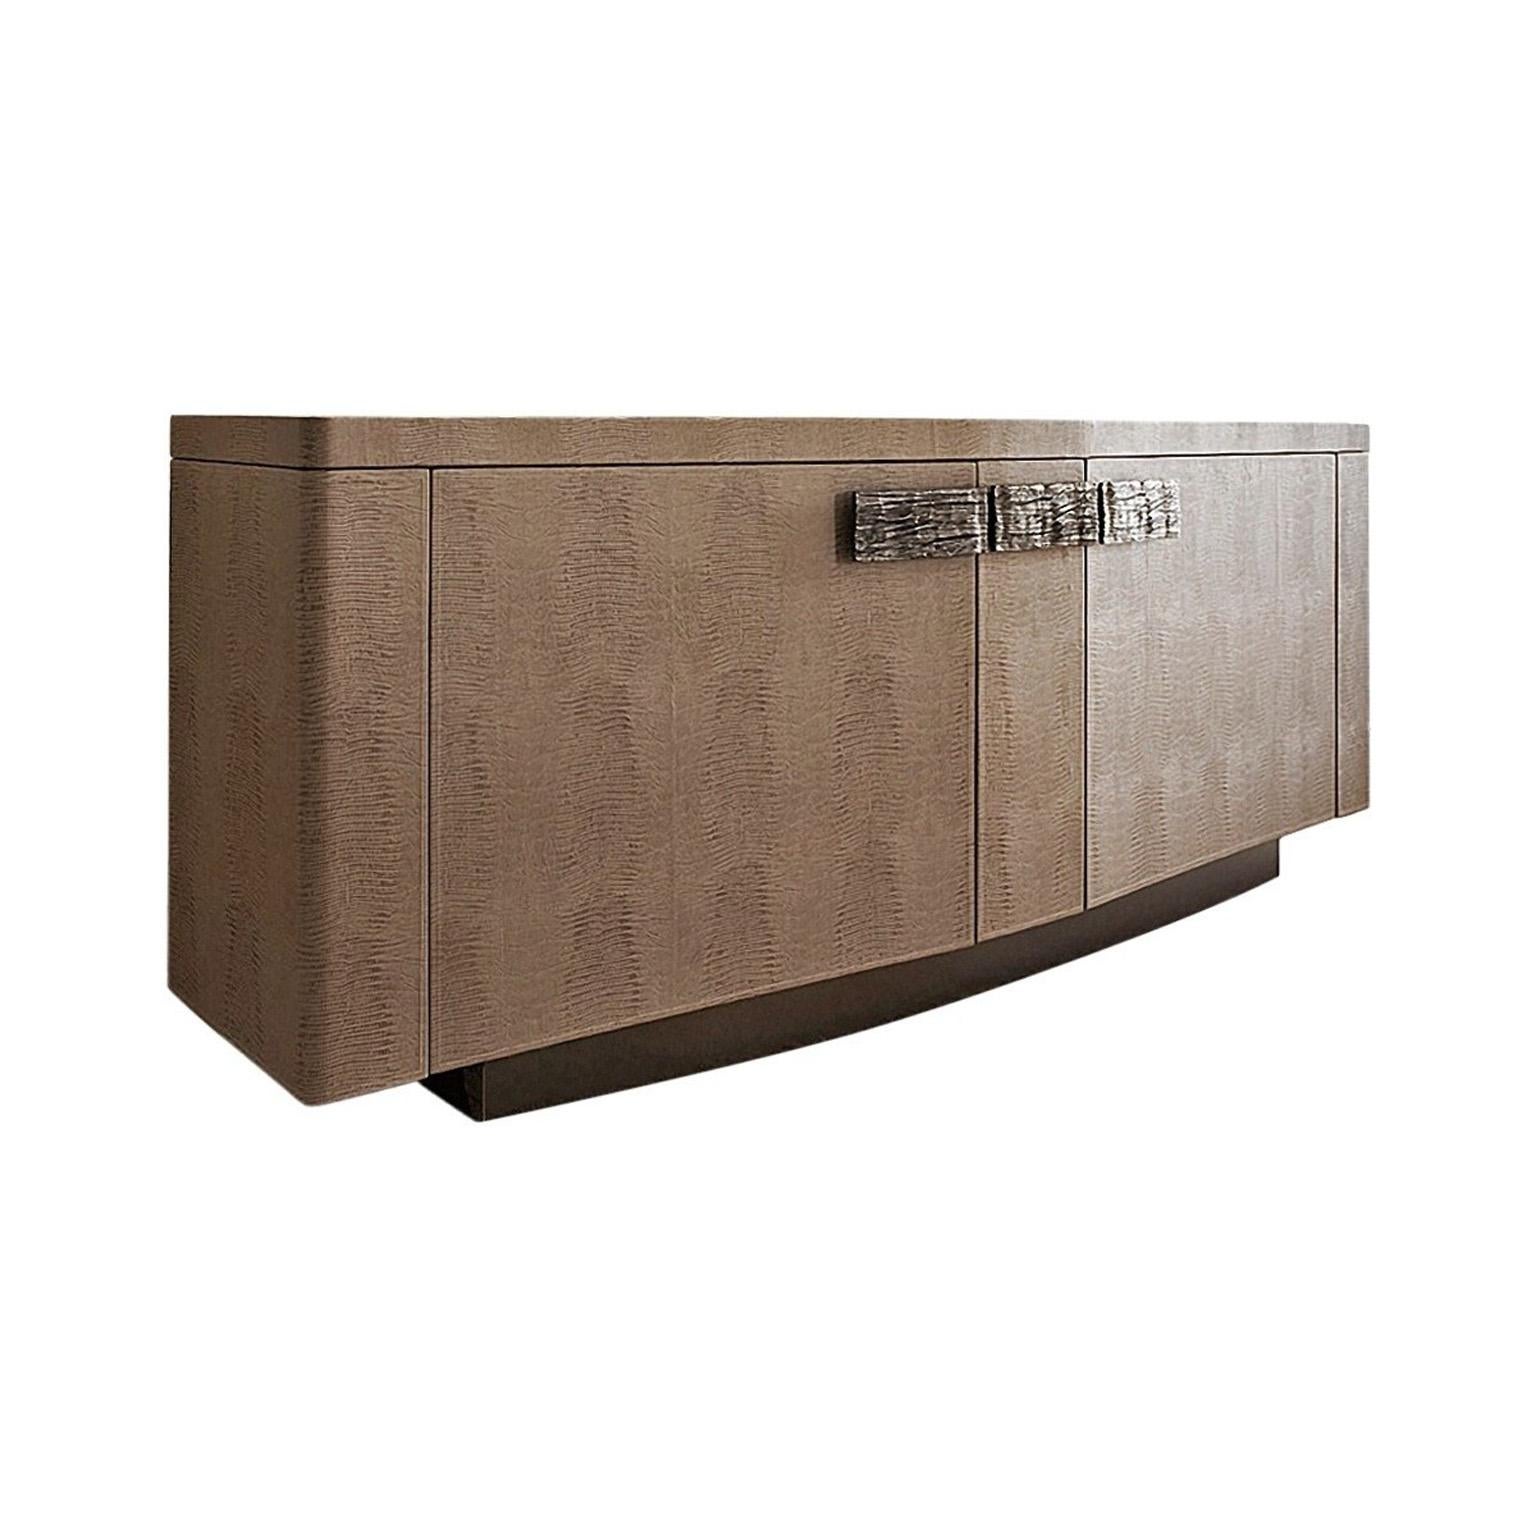 Two-door buffet in armadillo printed leather.
Brown emperador marble top insert with center drawer lined in leather.
Two interior adjustable glass shelves and two interior full extension drawers with bottom lined in armadillo printed leather.
LED